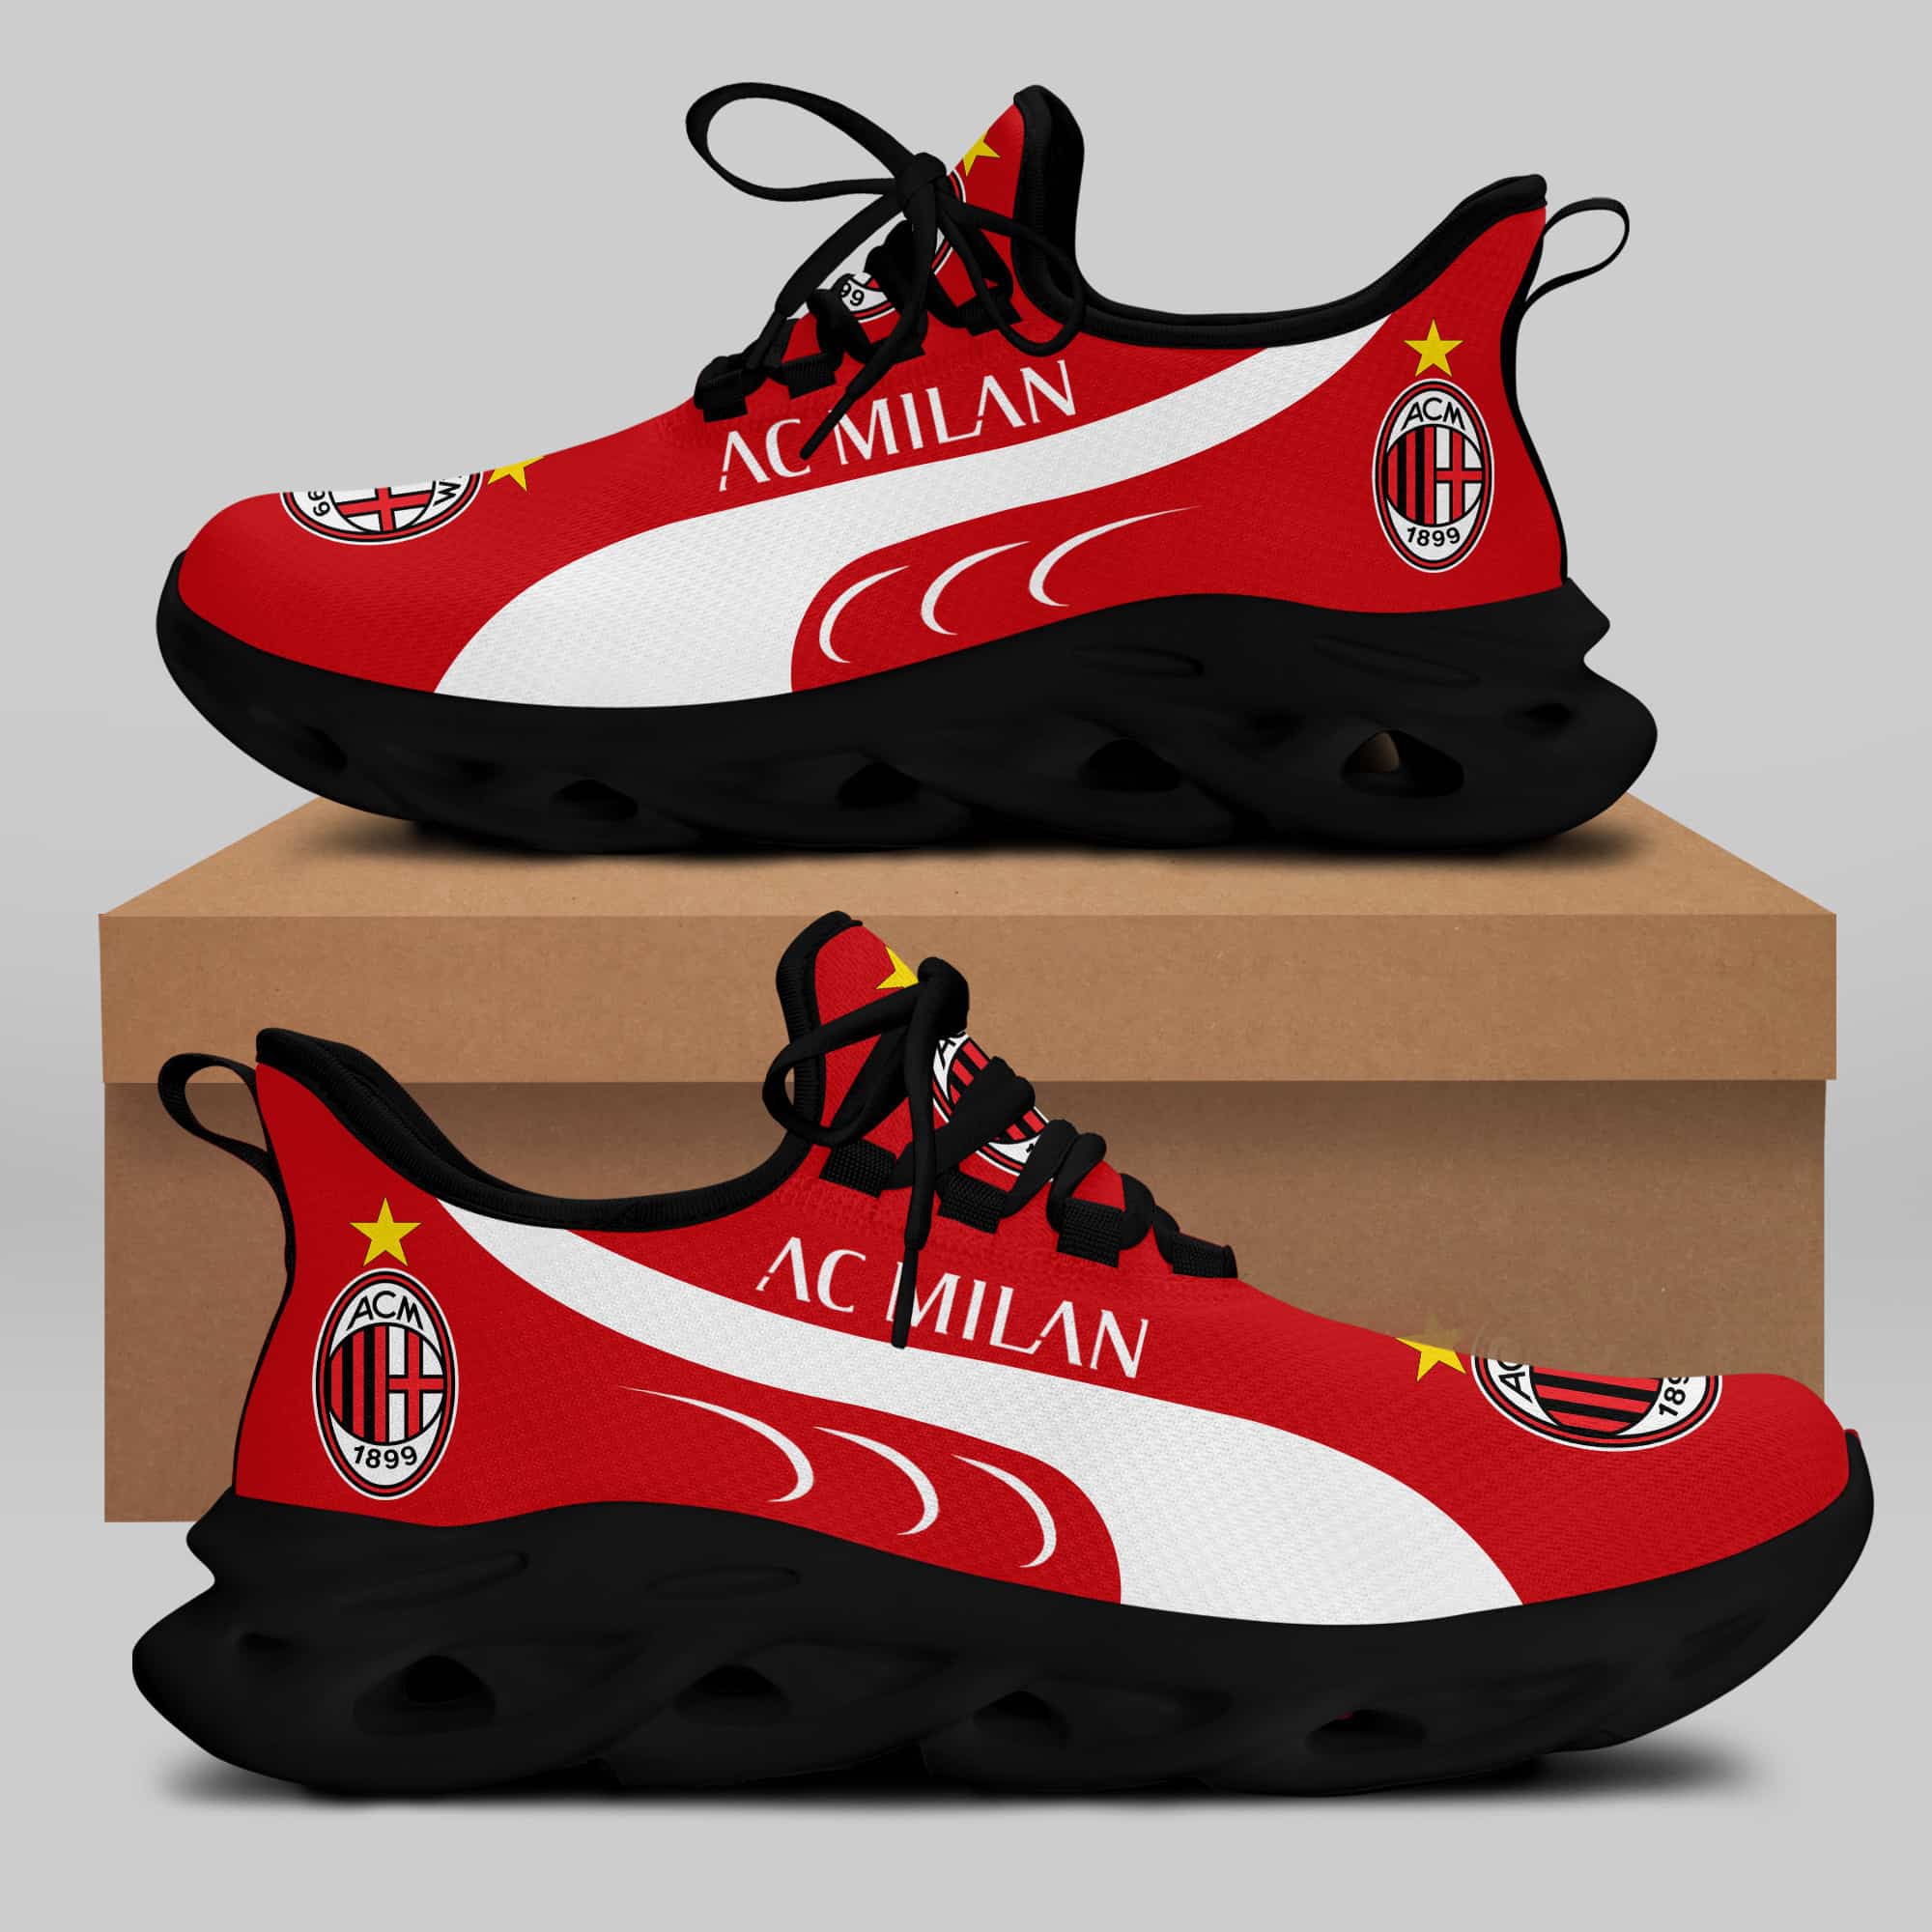 Ac Milan Running Shoes Max Soul Shoes Sneakers Ver 2 1